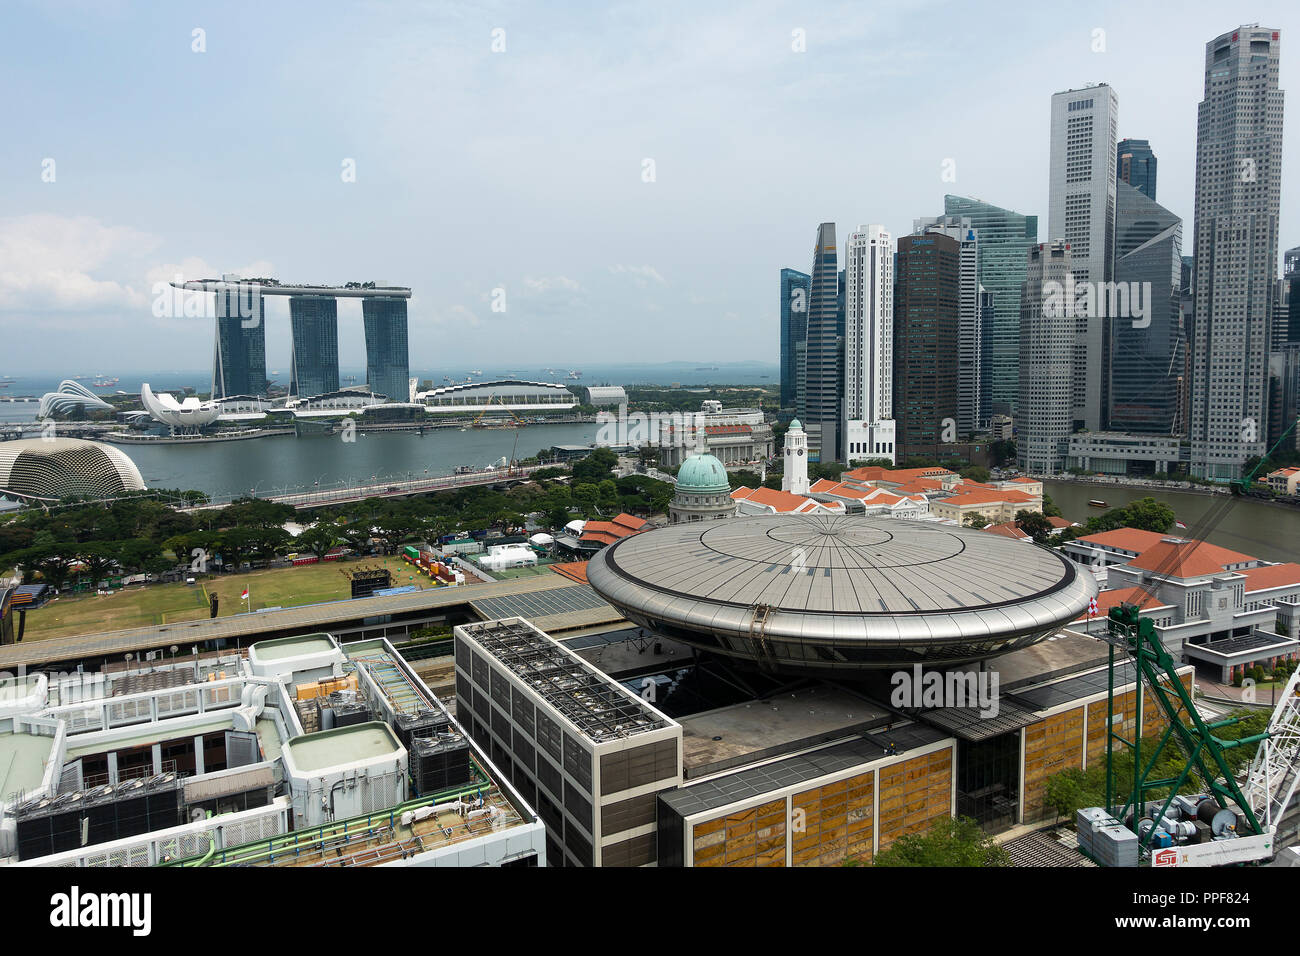 Aerial View of The Circular Supreme Court Building, Marina Bay Sands Hotel Complex and Financial District near Boat Quay in Singapore Asia Stock Photo